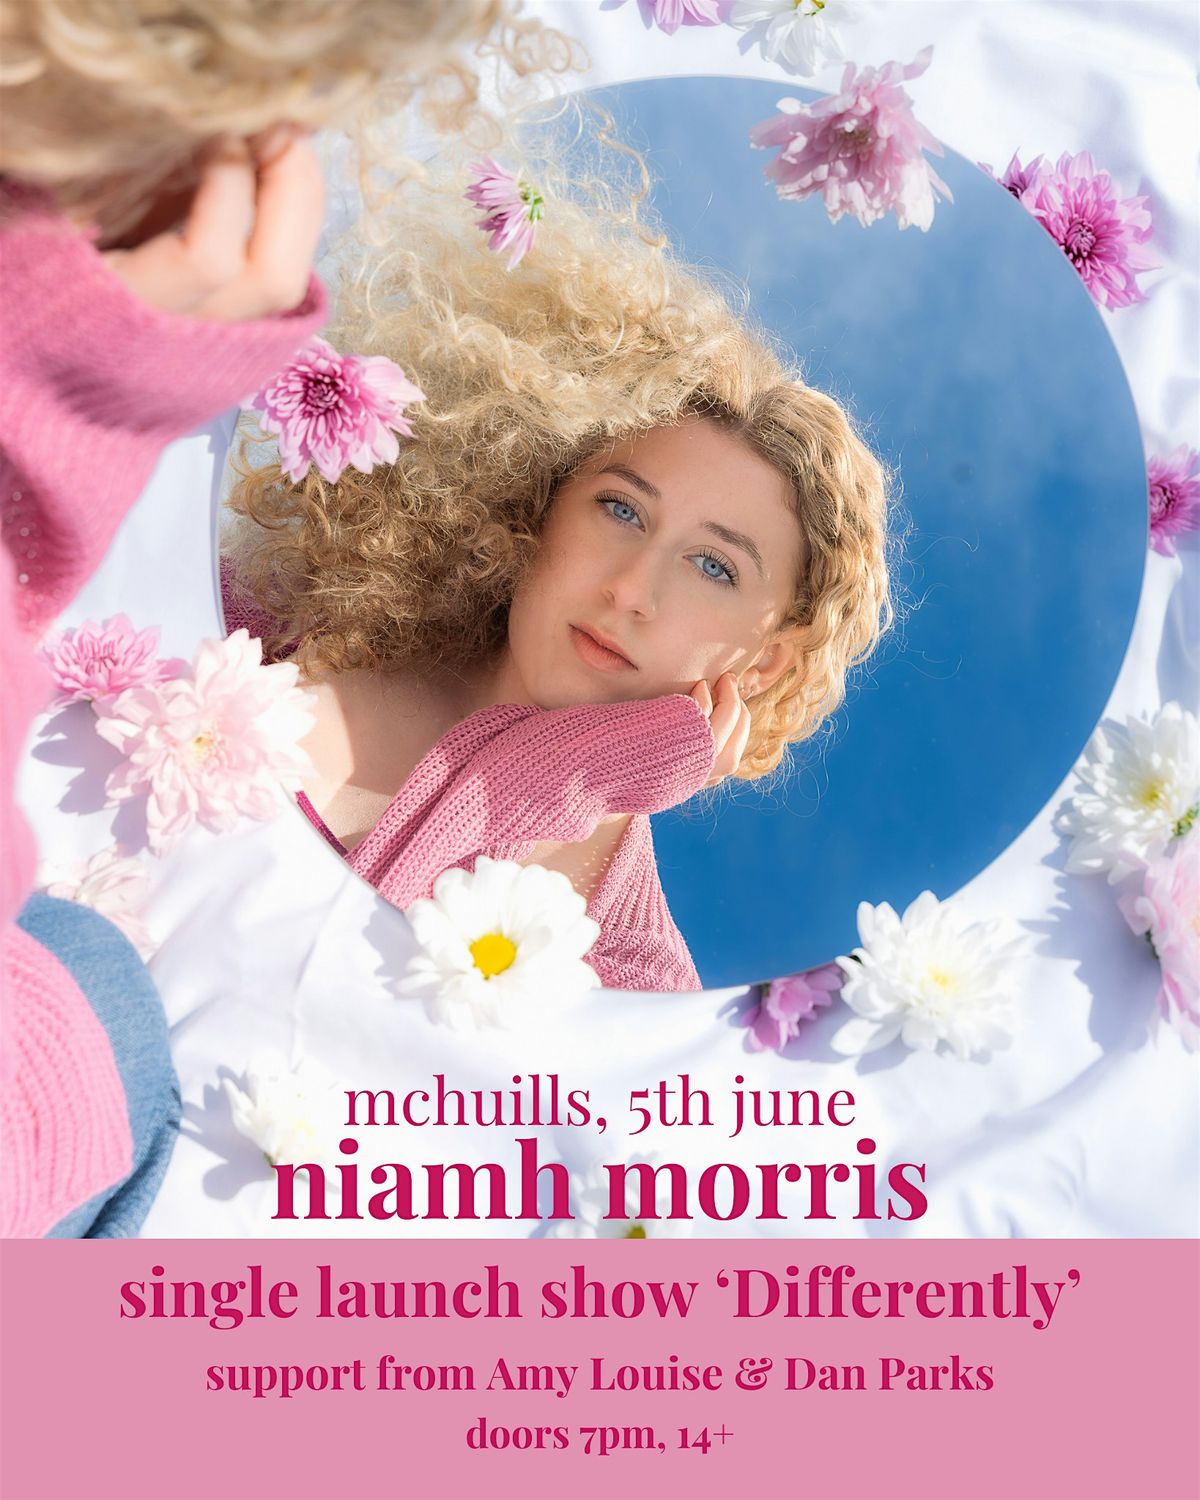 Niamh Morris 'Differently' Single Launch Show